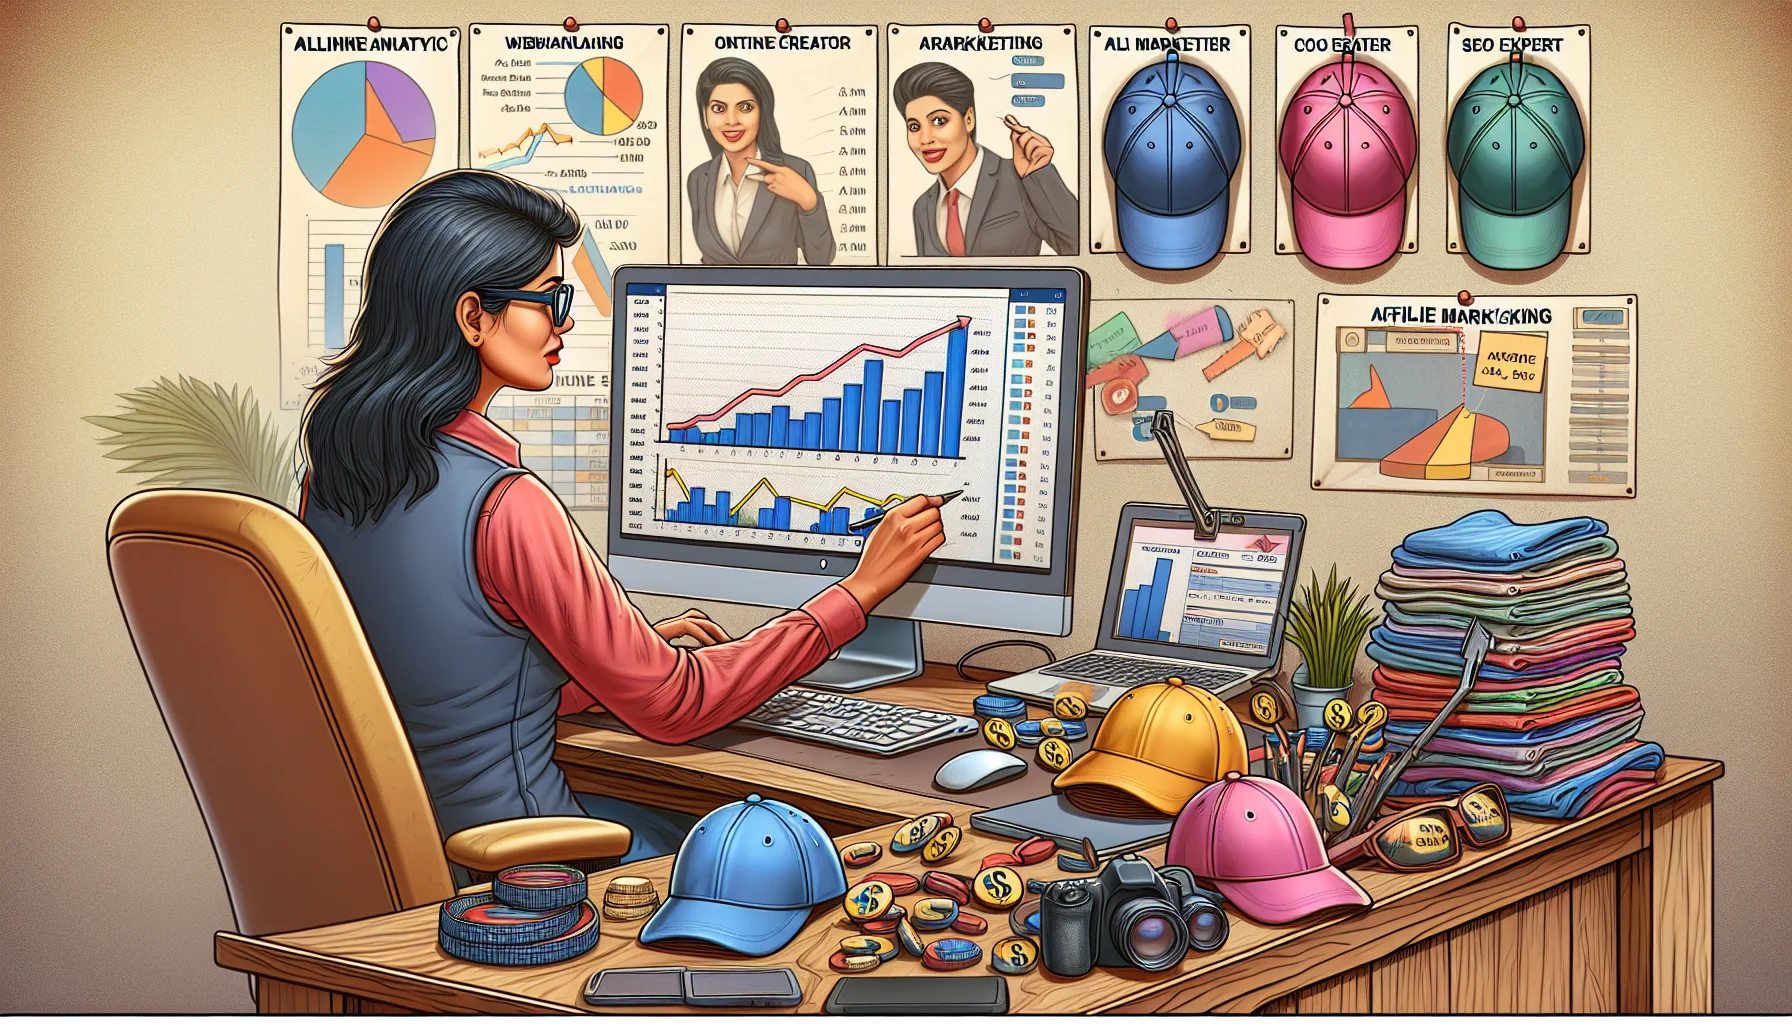 Create an amusing image depicting the reality of affiliate marketing, with a focus on the online money-making aspect. Picture a South Asian woman at a computer, her screen filled with graphs representing website analytics and sales statistics. There's a noticeable progression in the graphs from low to high sales, hinting at the potential for revenue increase through affiliate marketing. However, an array of different hats on a rack nearby represent the multiple roles she must fill - marketer, content creator, SEO expert, for example - emphasising the effort and skills required behind the scenes.